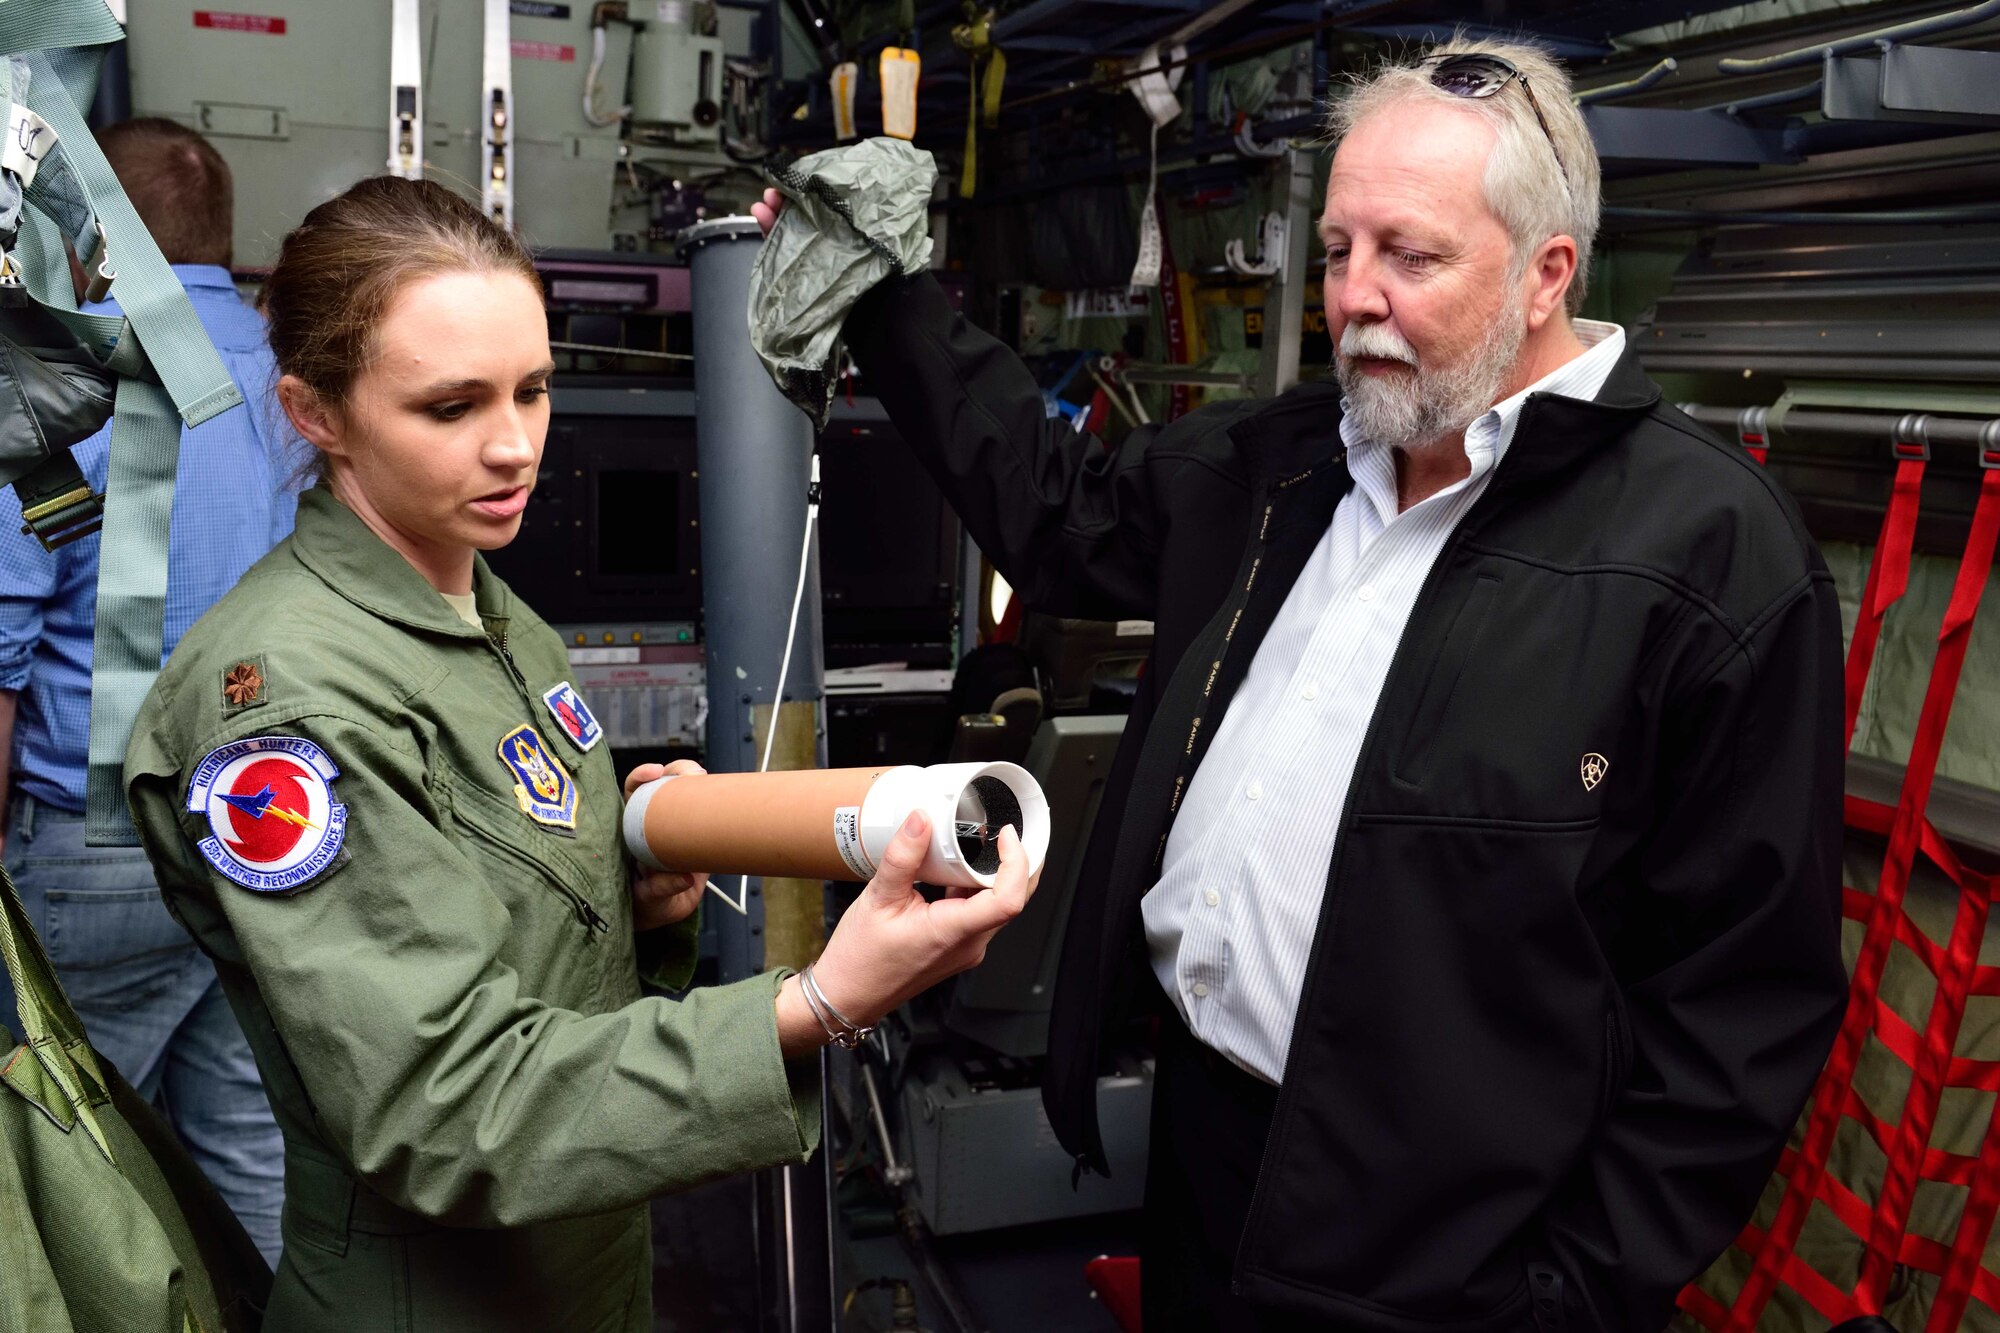 Maj. Ashley Lundry, 53rd Weather Reconnaissance Squadron aerial reconnaissance weather officer and chief scientific officer, shows a weather data-gathering instrument called a dropsonde to Dr. Fred “Marty” Ralph, Researcher and Director for the Center of Western Weather and Water Extremes, Scripps Institute of Oceanography, Nov. 29, 2017, at Brown Field Airport, San Diego, California. Hurricane Hunters met with Ralph and other Scripps scientists that day to discuss plans for participating in atmospheric river reconnaissance missions in early 2018. (U.S. Air Force photo by Tech. Sgt. Ryan Labadens)